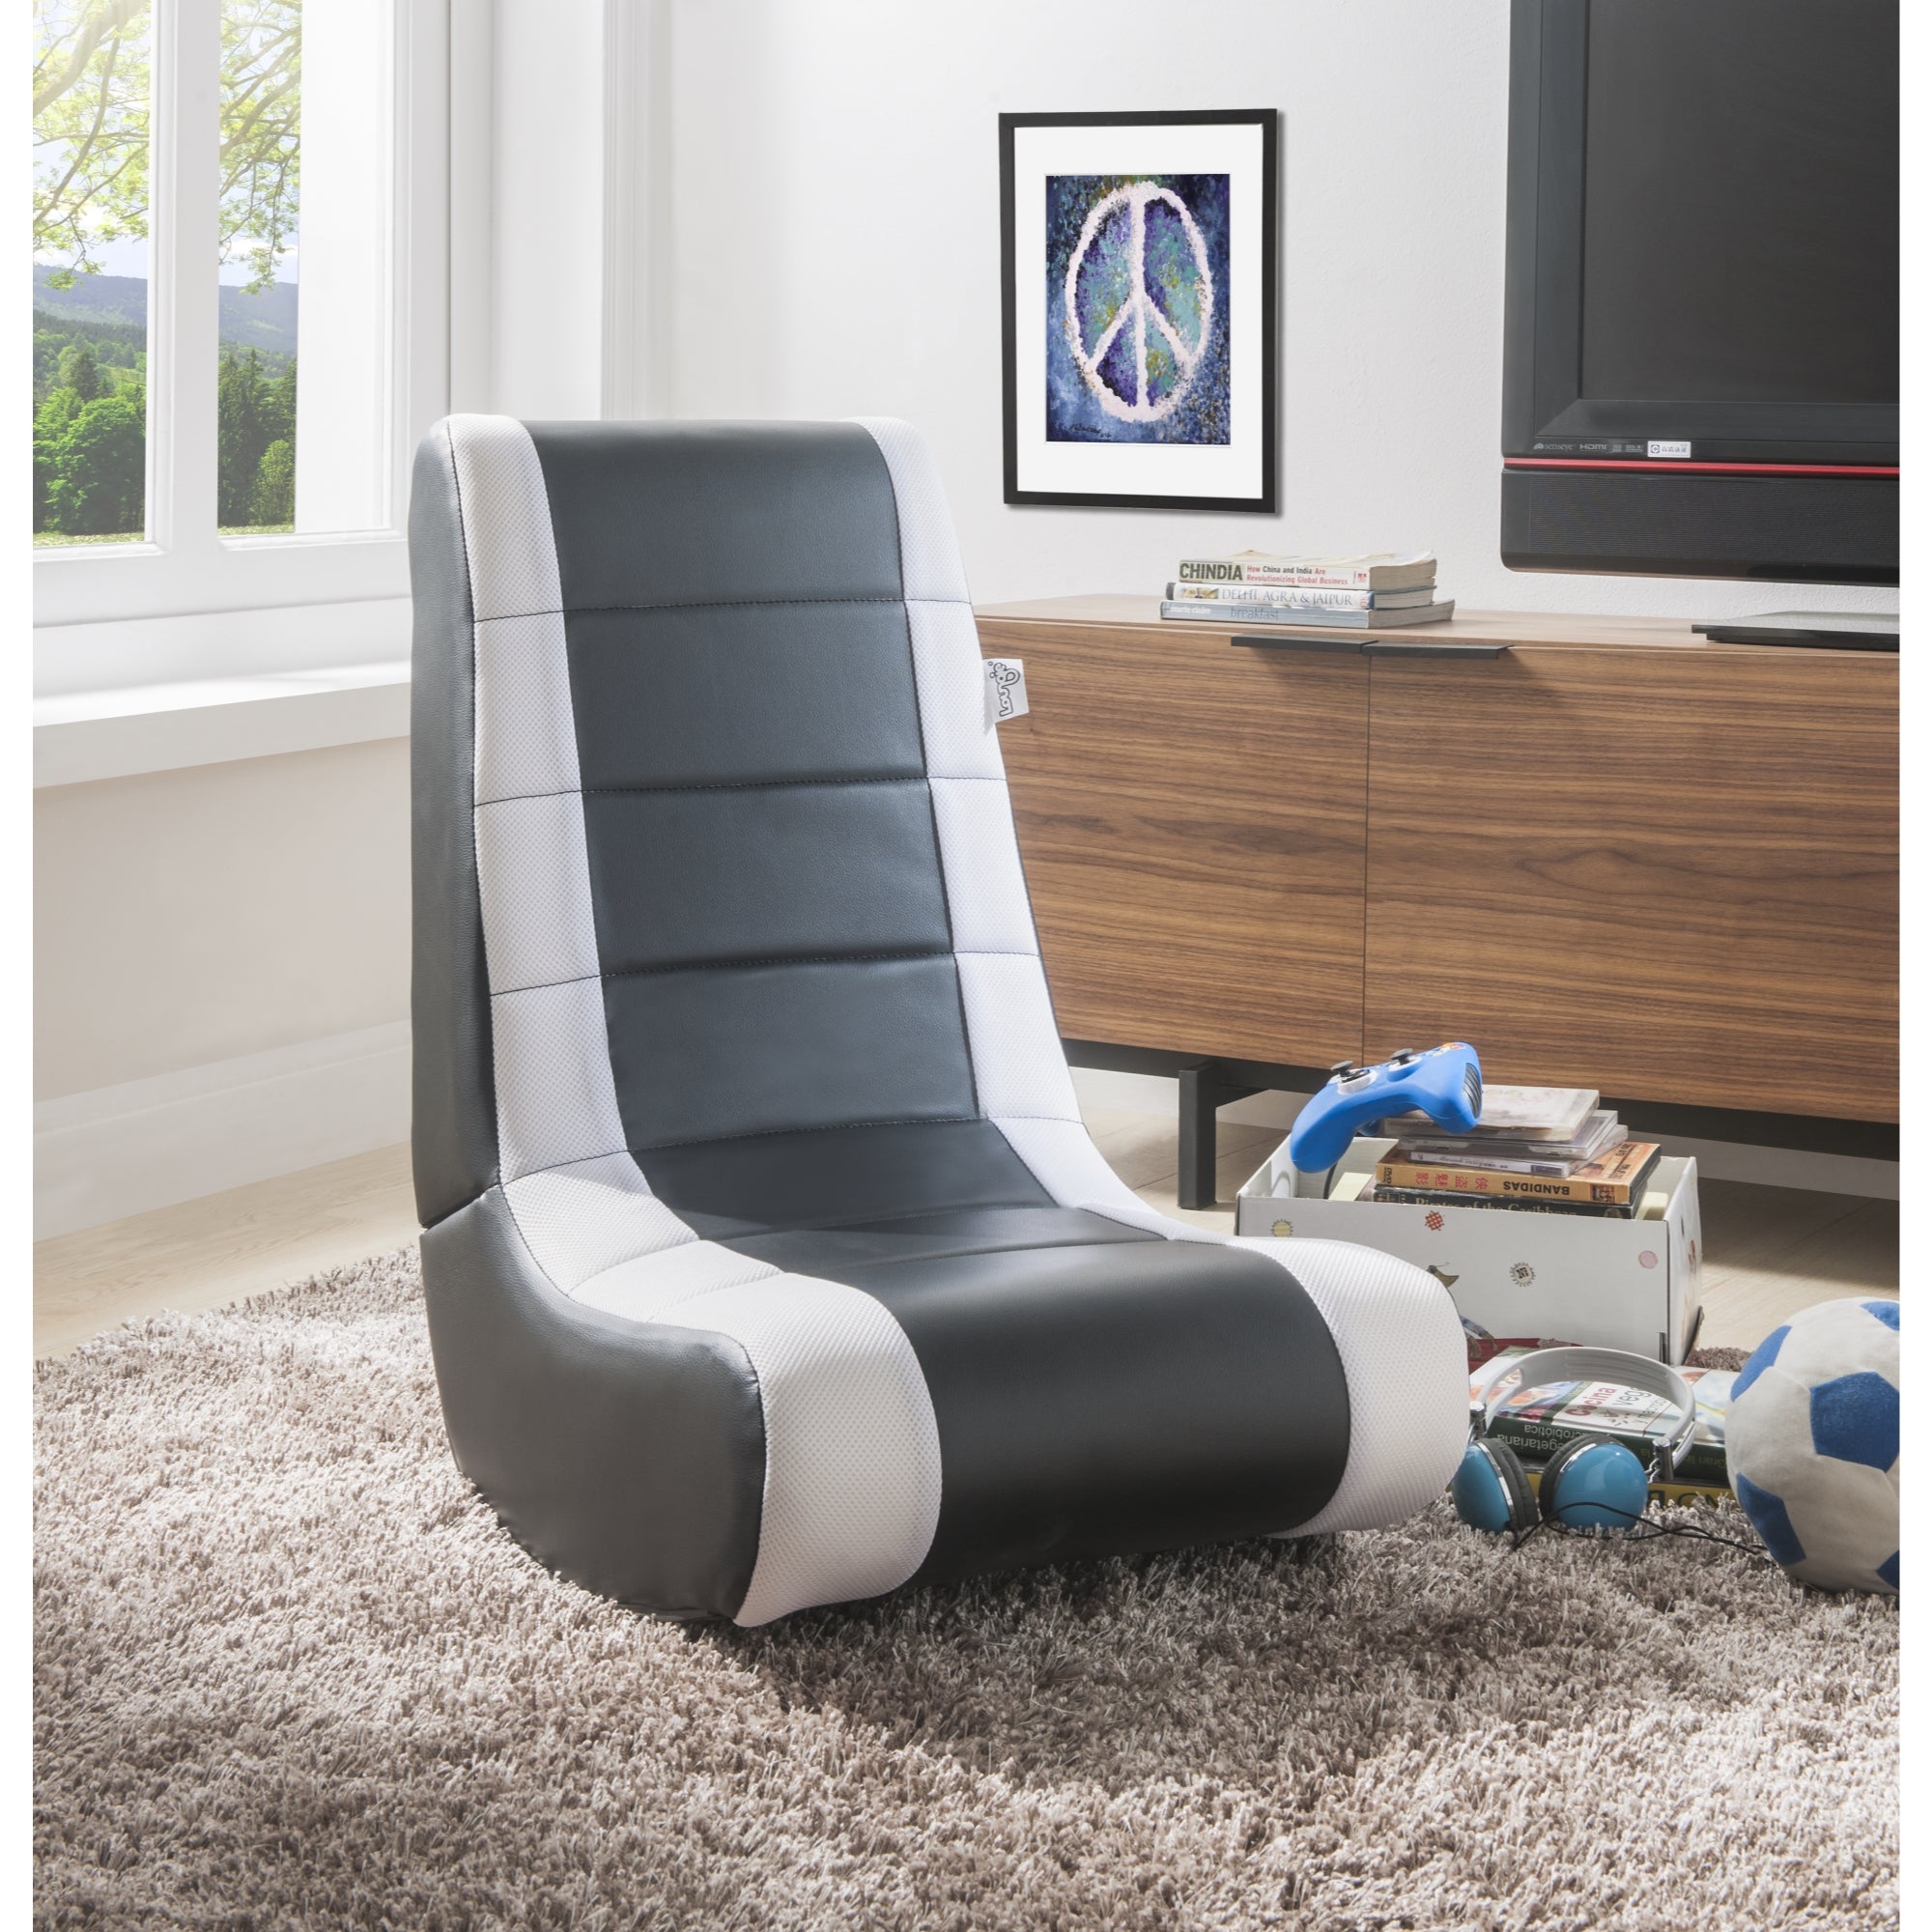 Shop Loungie Rockme Gaming Chair